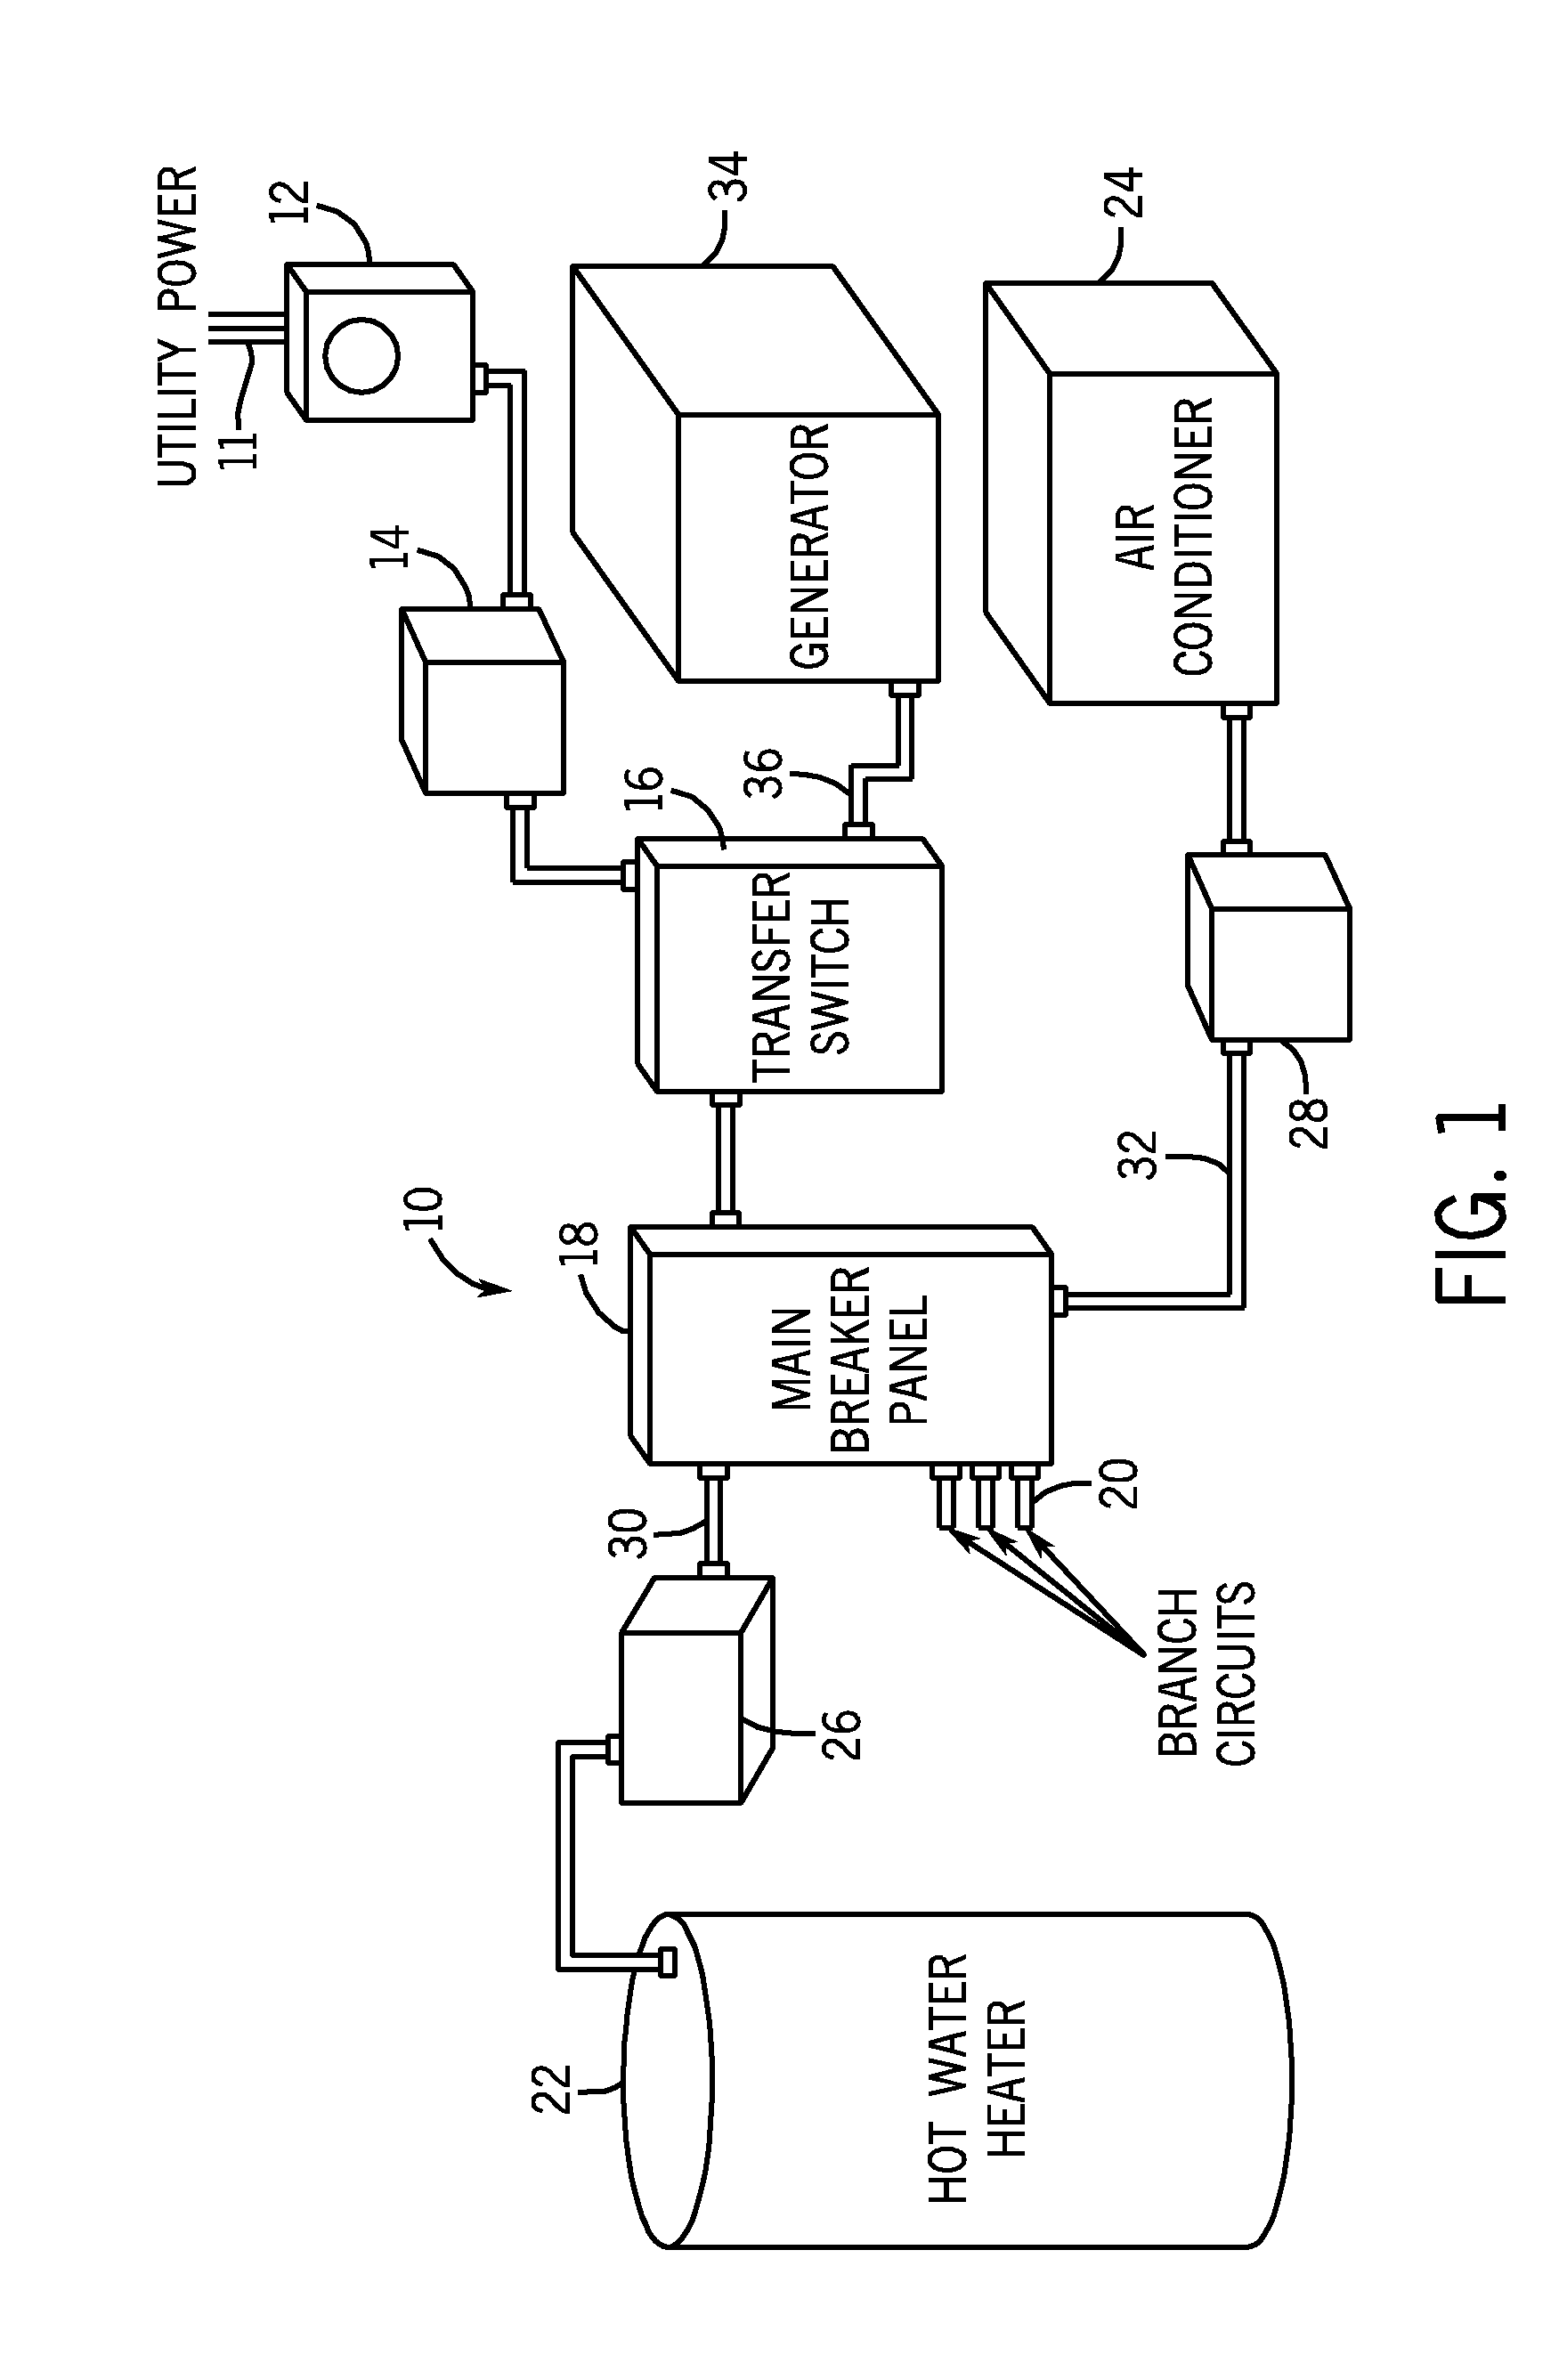 Dynamic load shedding system for a standby generator